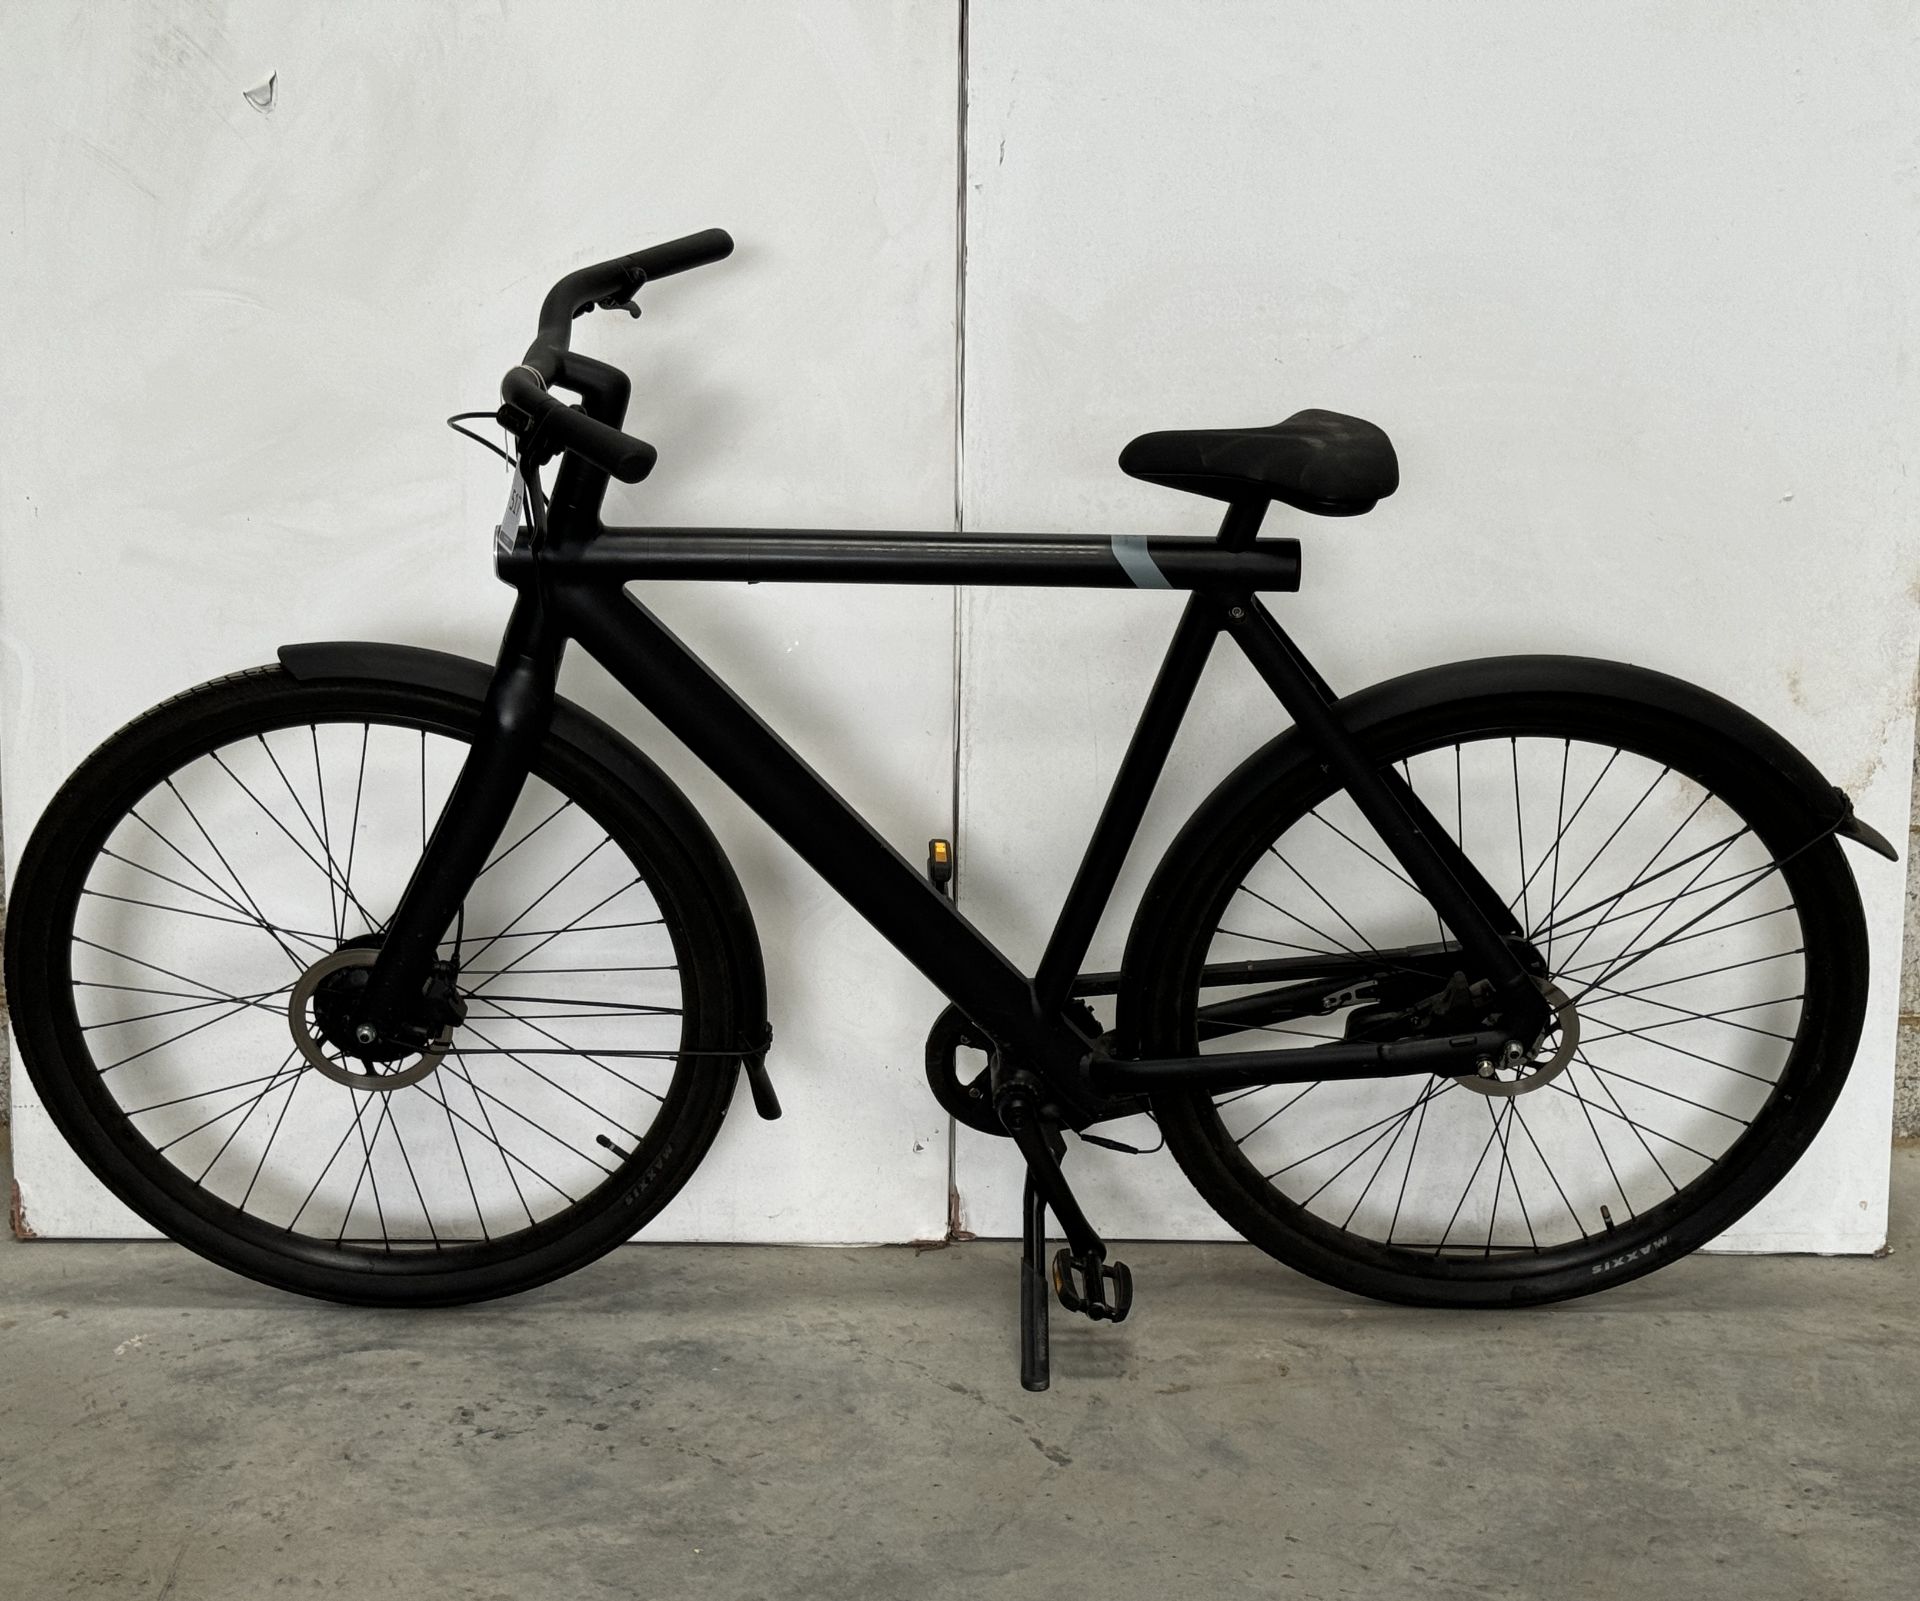 VanMoof S3 Electric Bike, Frame Number ASY3118341 (NOT ROADWORTHY - FOR SPARES ONLY) (No codes